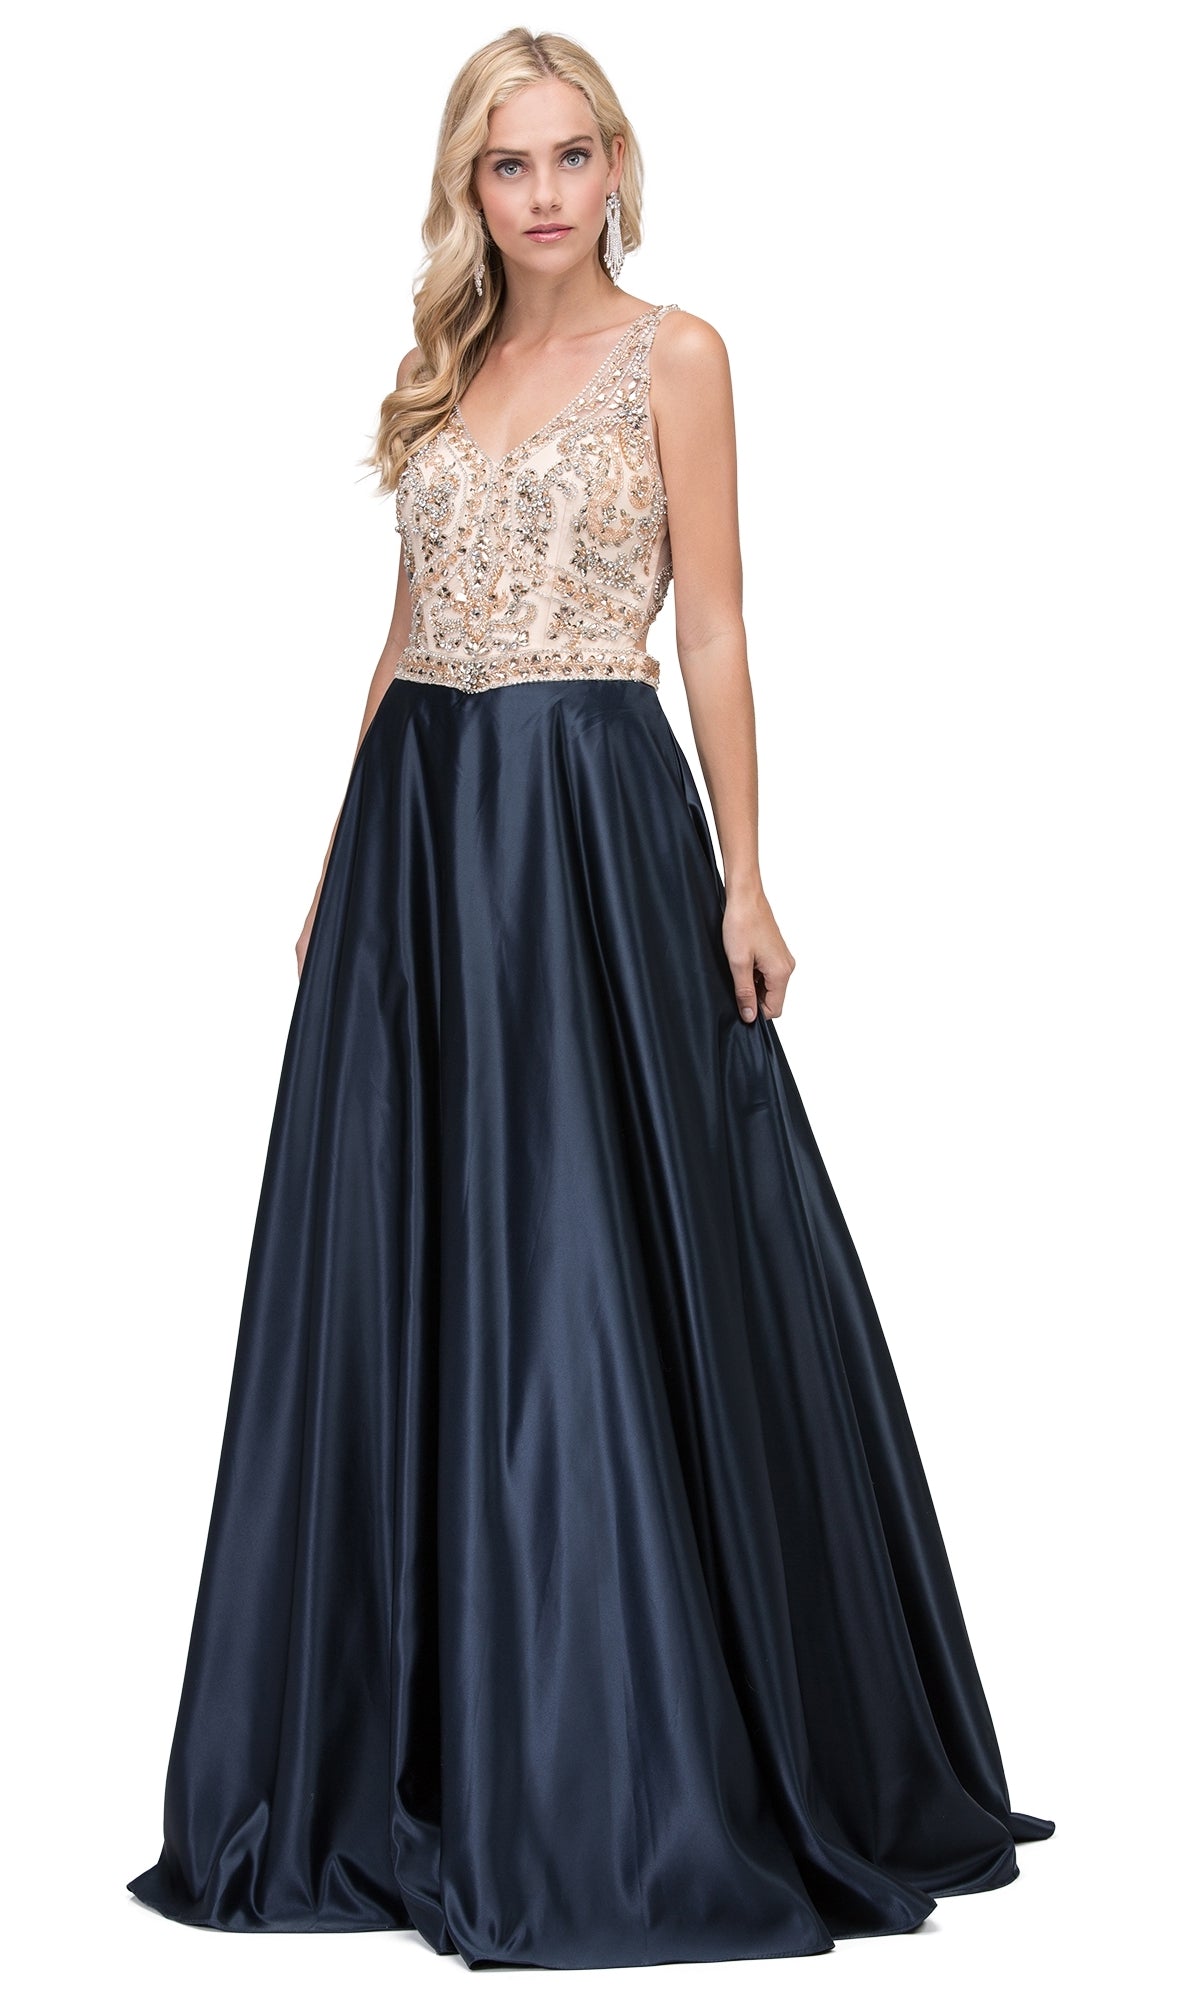 Navy Beaded-Bodice Classic Formal Ball Gown with Pockets